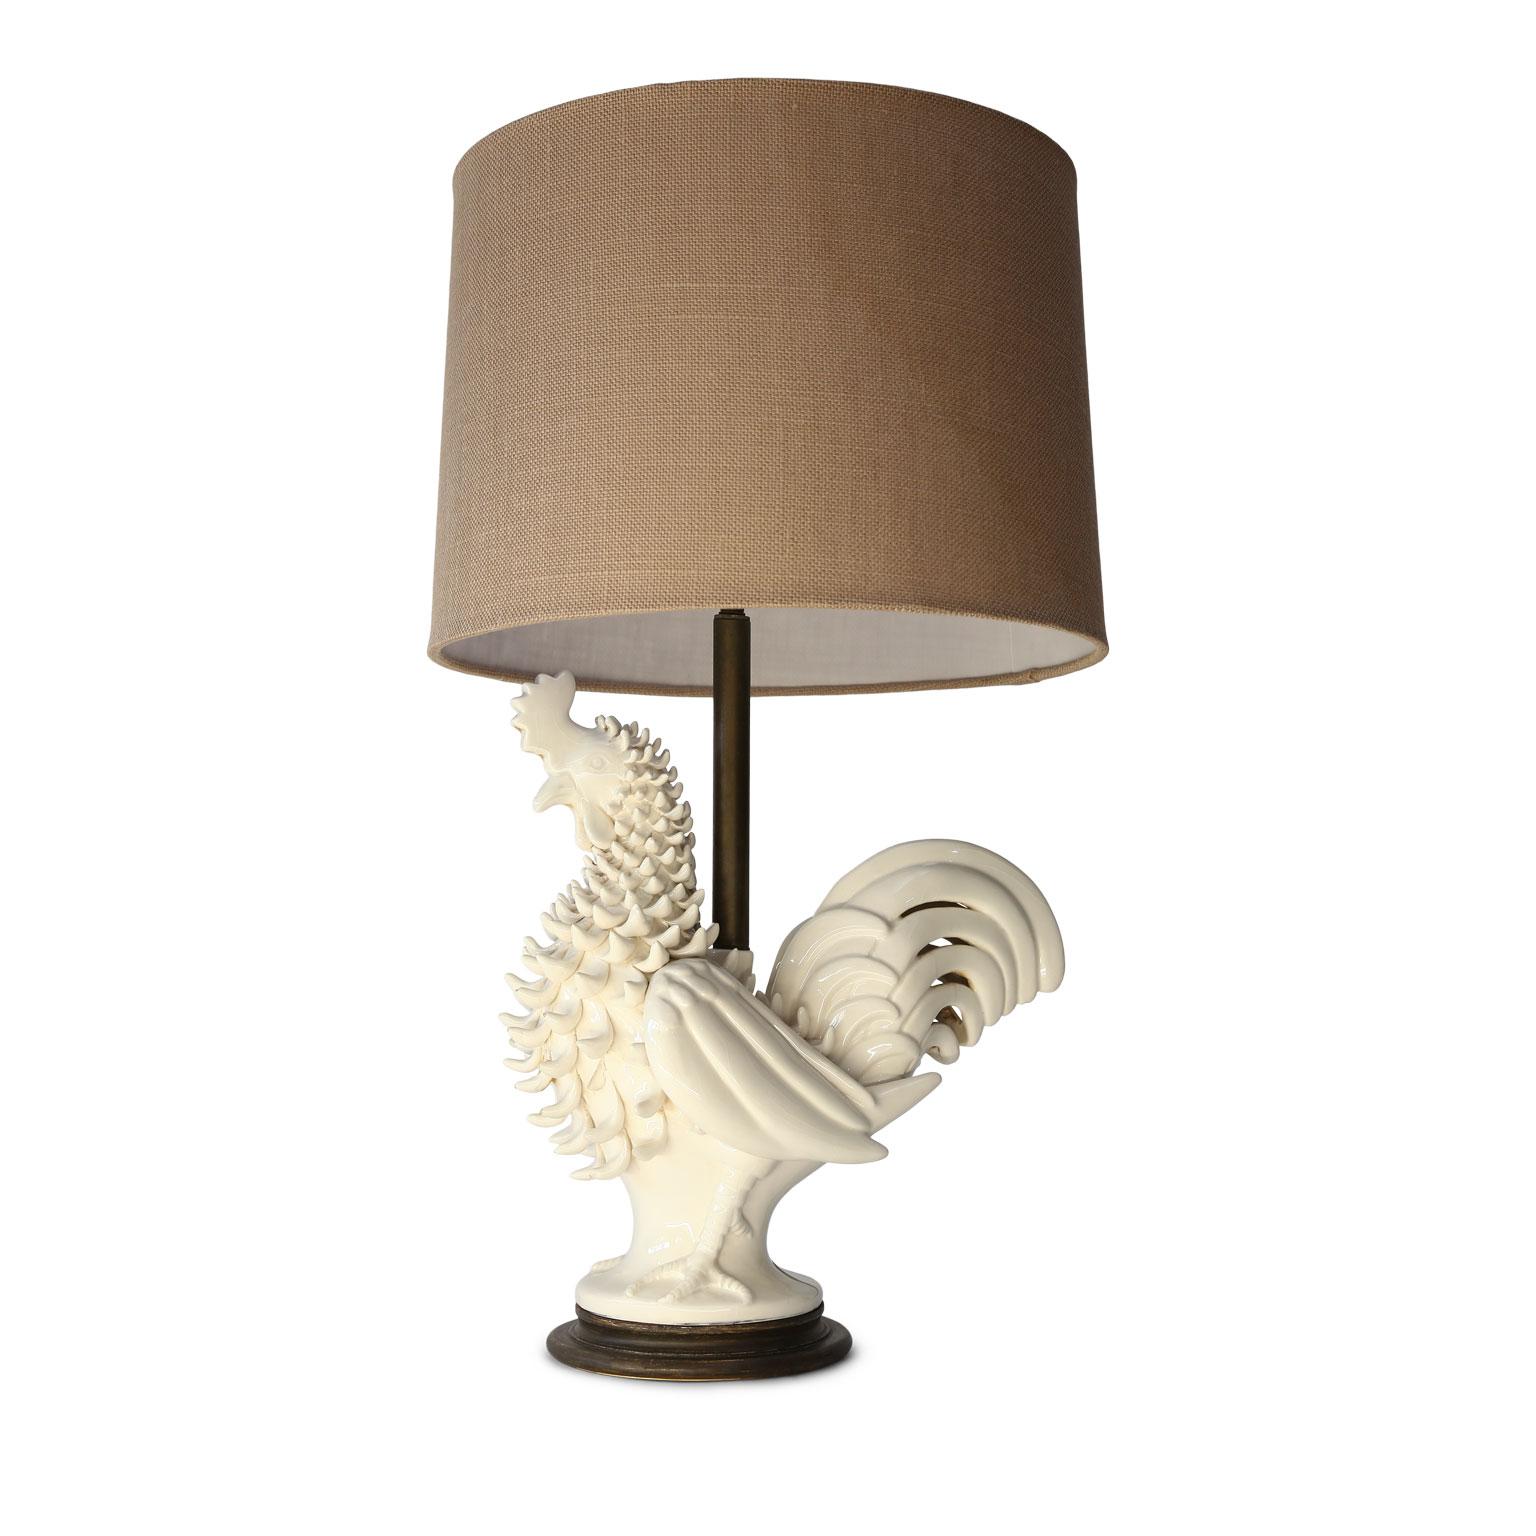 Hand-Painted Italian Ceramic Rooster Lamp